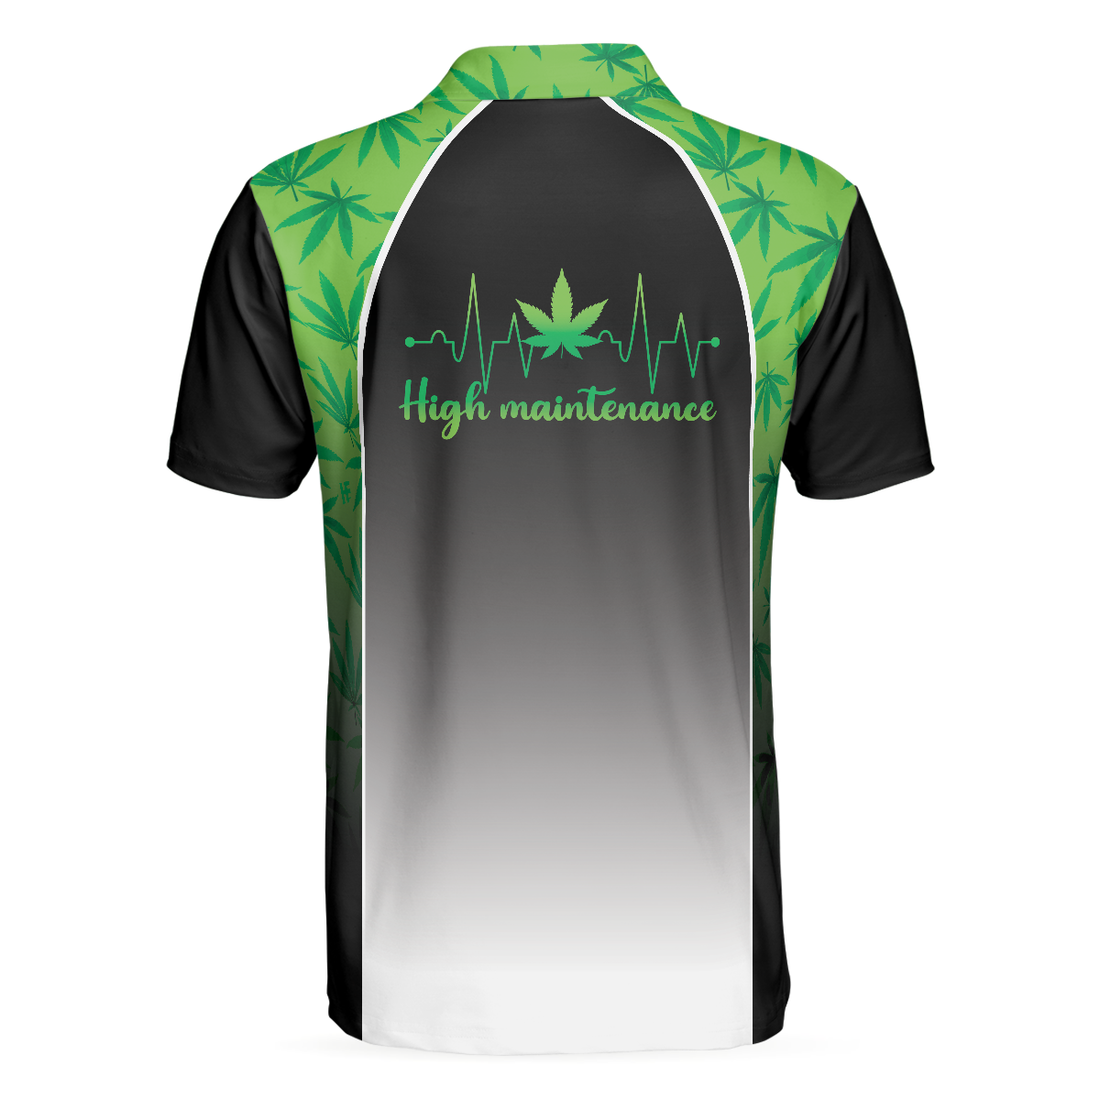 High Maintenance Weed Polo Shirt Green Weed Polo Shirt For Men Black Tie Dye Weed Pattern Shirt Design - 1